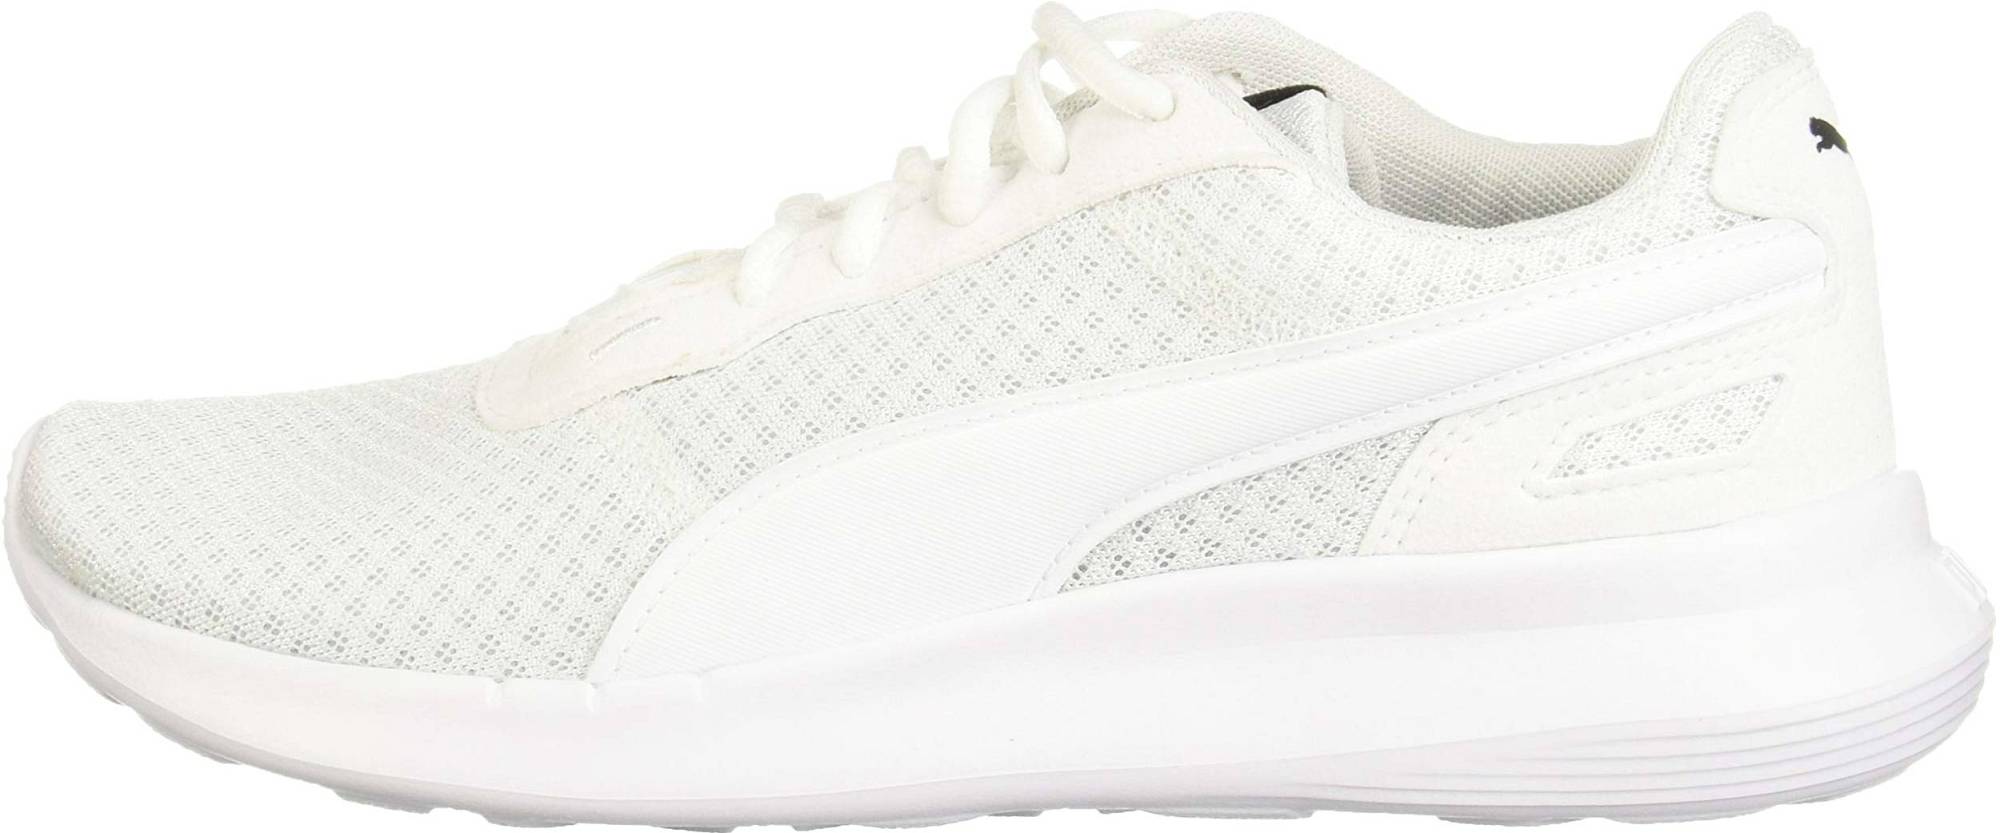 Puma ST Activate – Shoes Reviews & Reasons To Buy